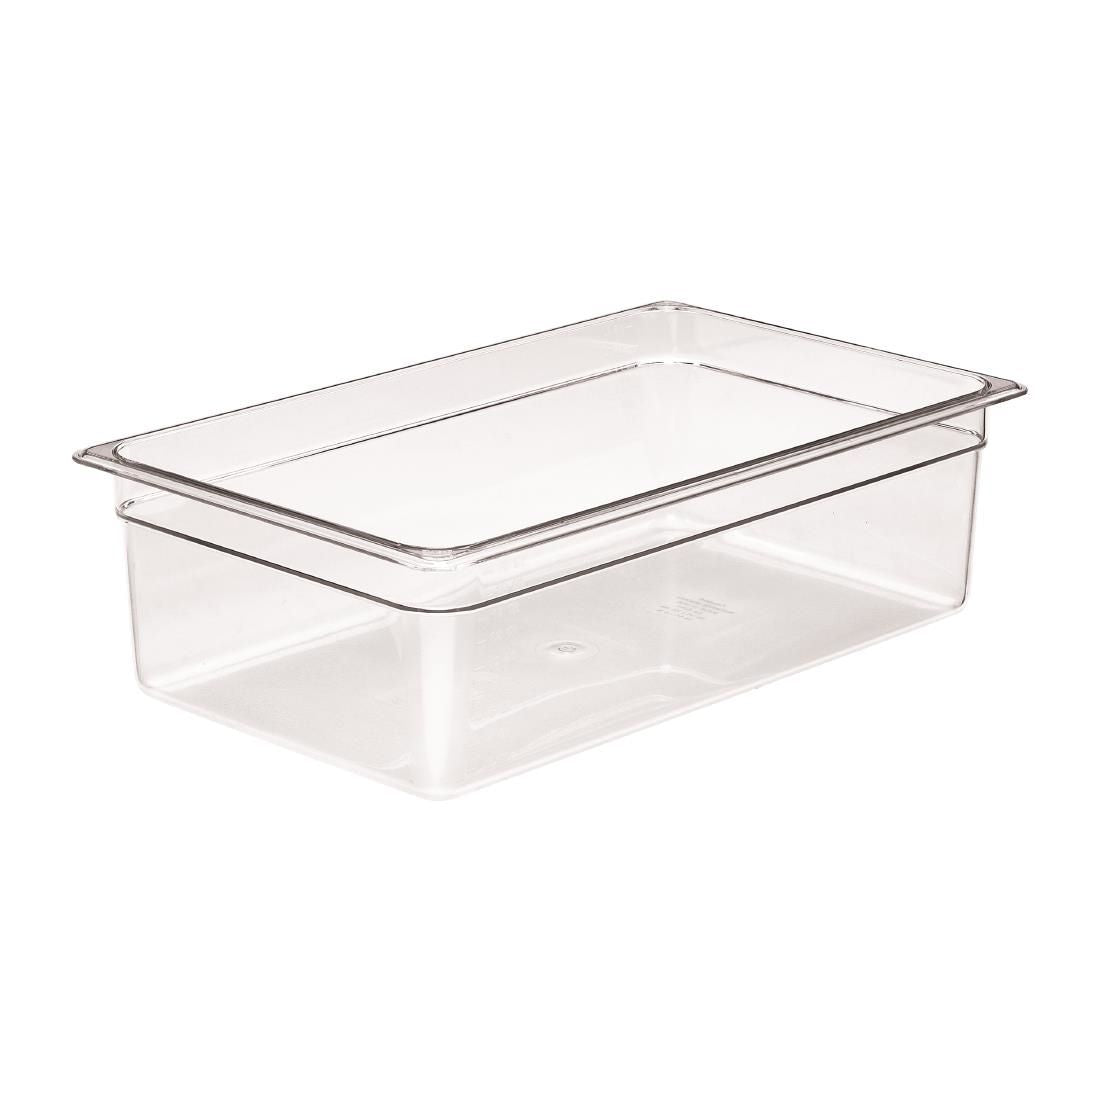 DM738 Cambro Polycarbonate 1/1 Gastronorm Pan 150mm JD Catering Equipment Solutions Ltd